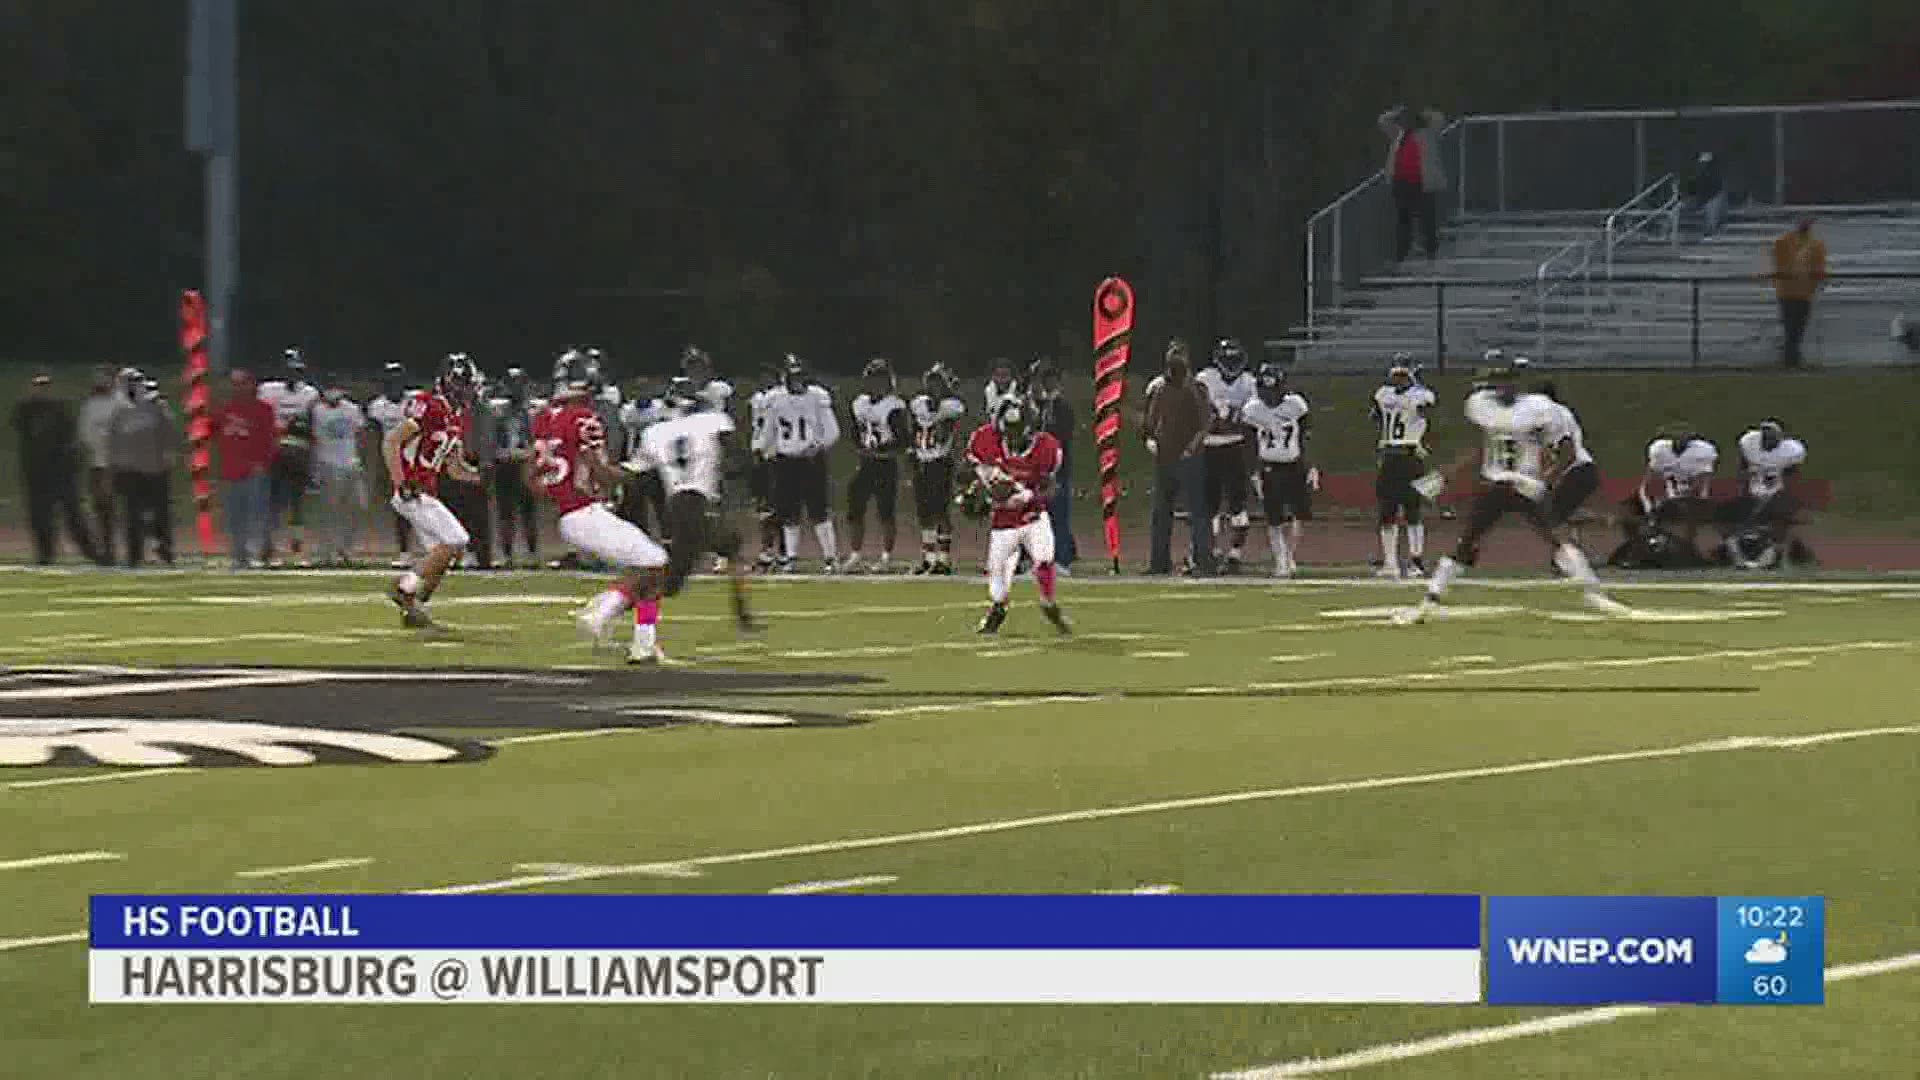 Harrisburg, up 12-0 at halftime, rolls over Williamsport 41-0 in HS football